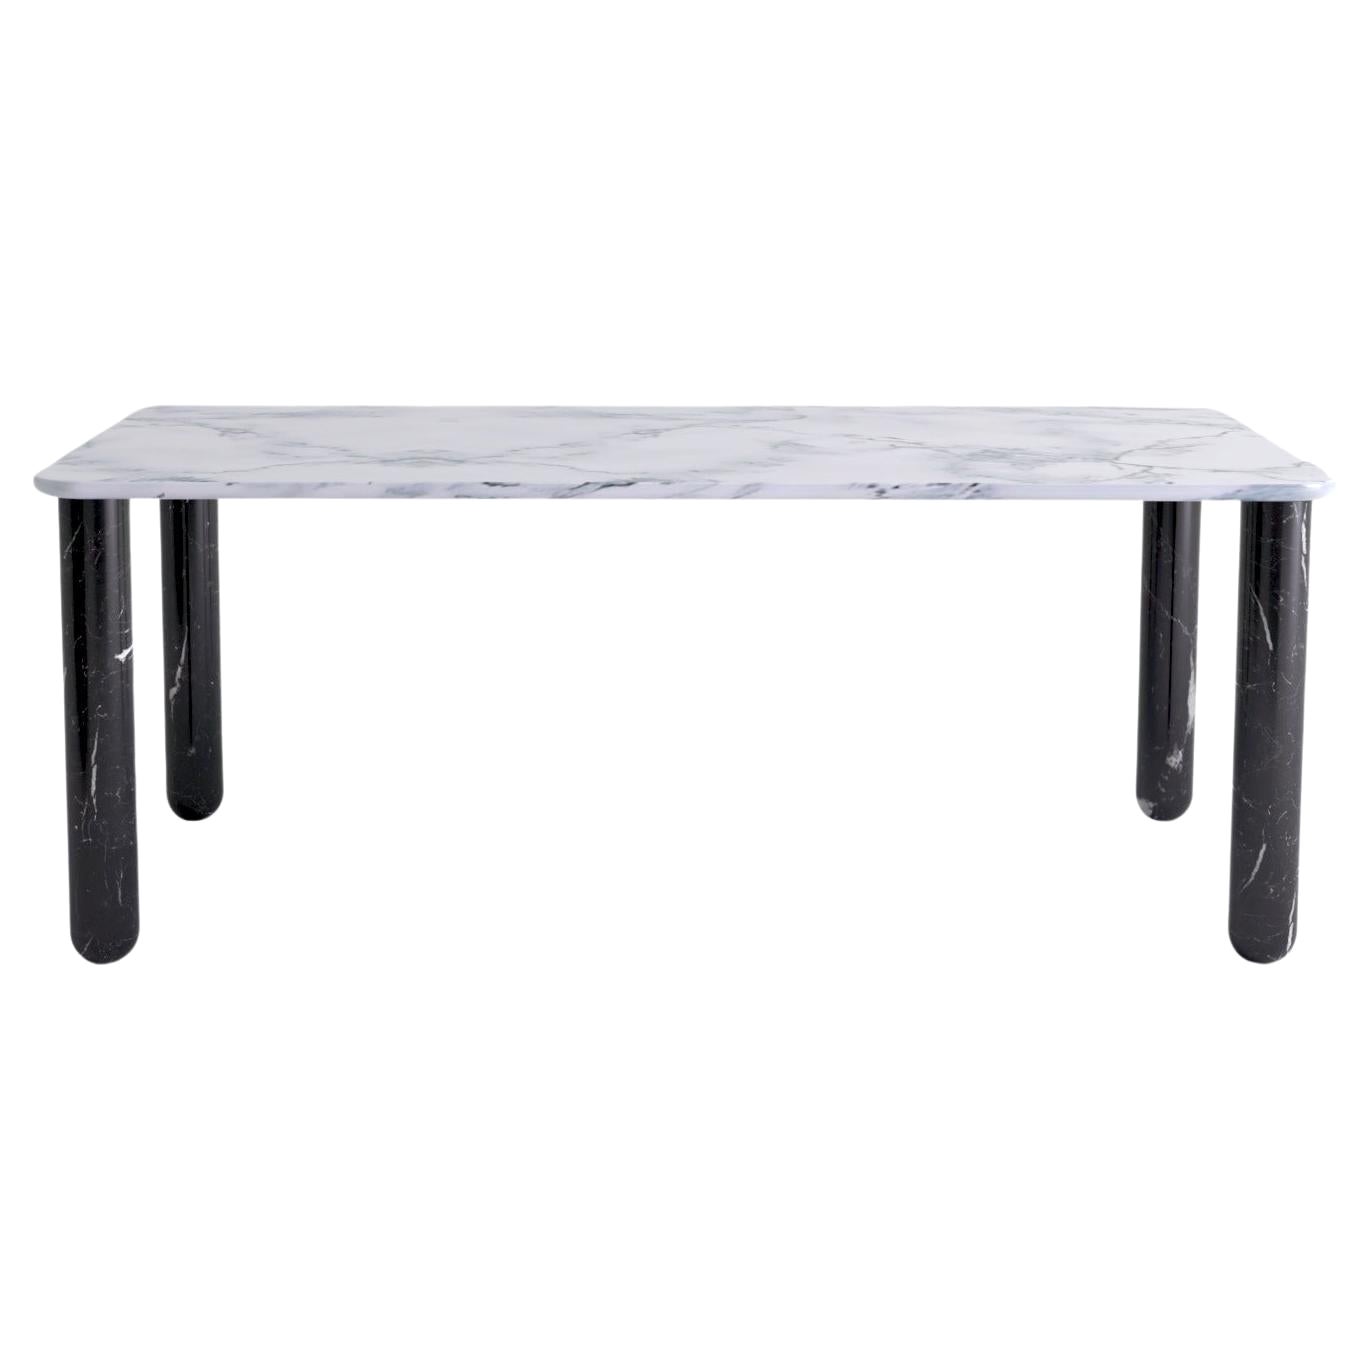 X Large White and Black Marble "Sunday" Dining Table, Jean-Baptiste Souletie For Sale